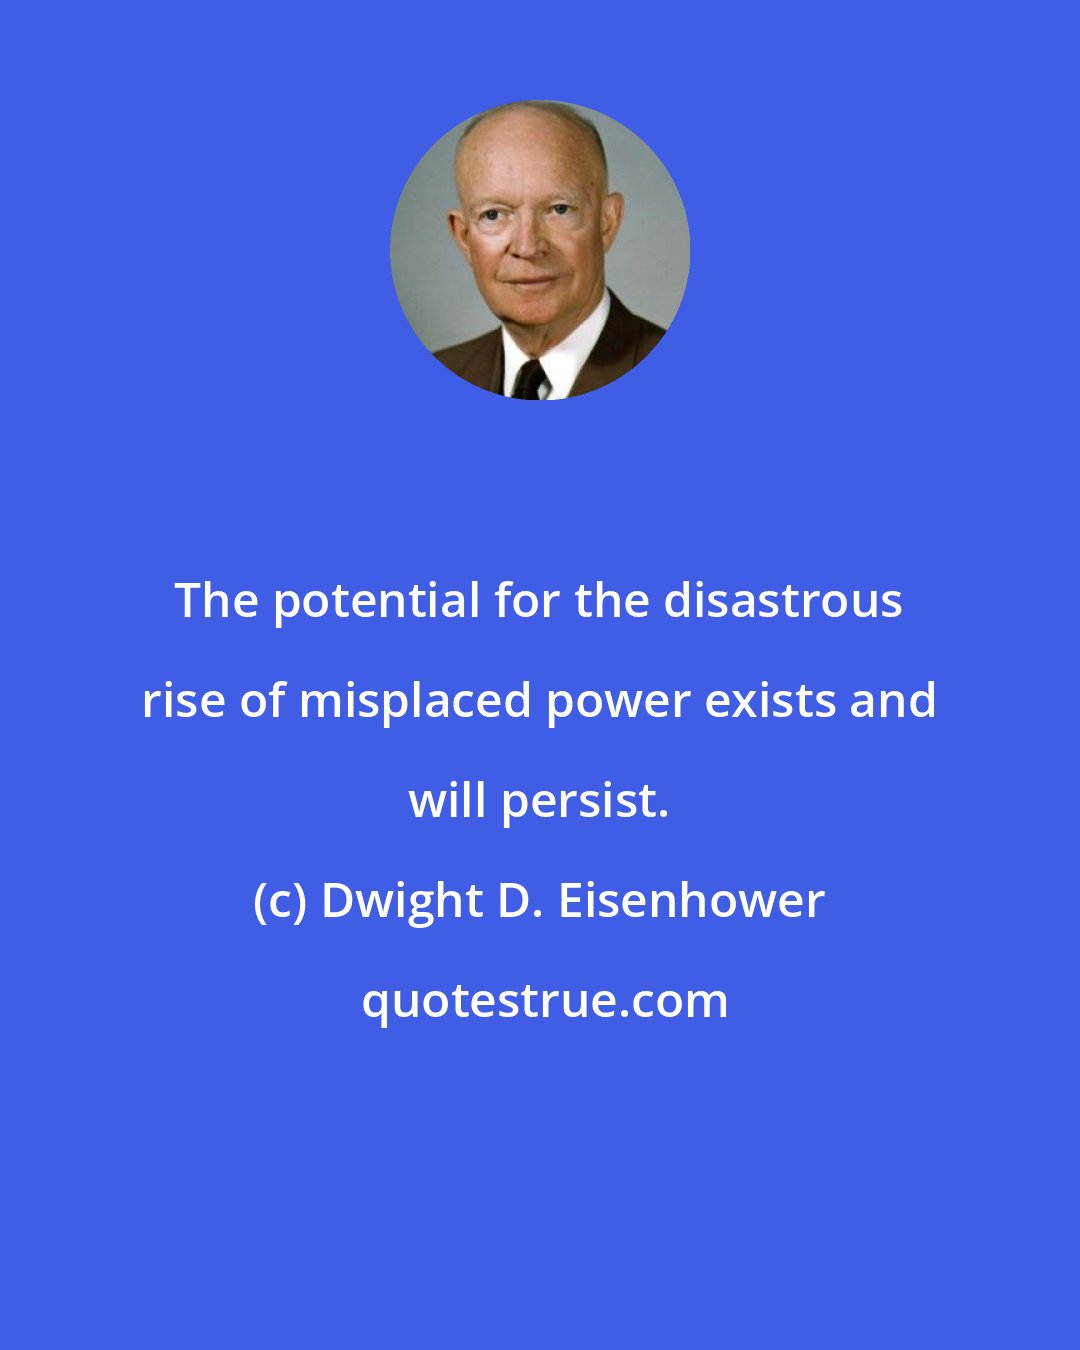 Dwight D. Eisenhower: The potential for the disastrous rise of misplaced power exists and will persist.